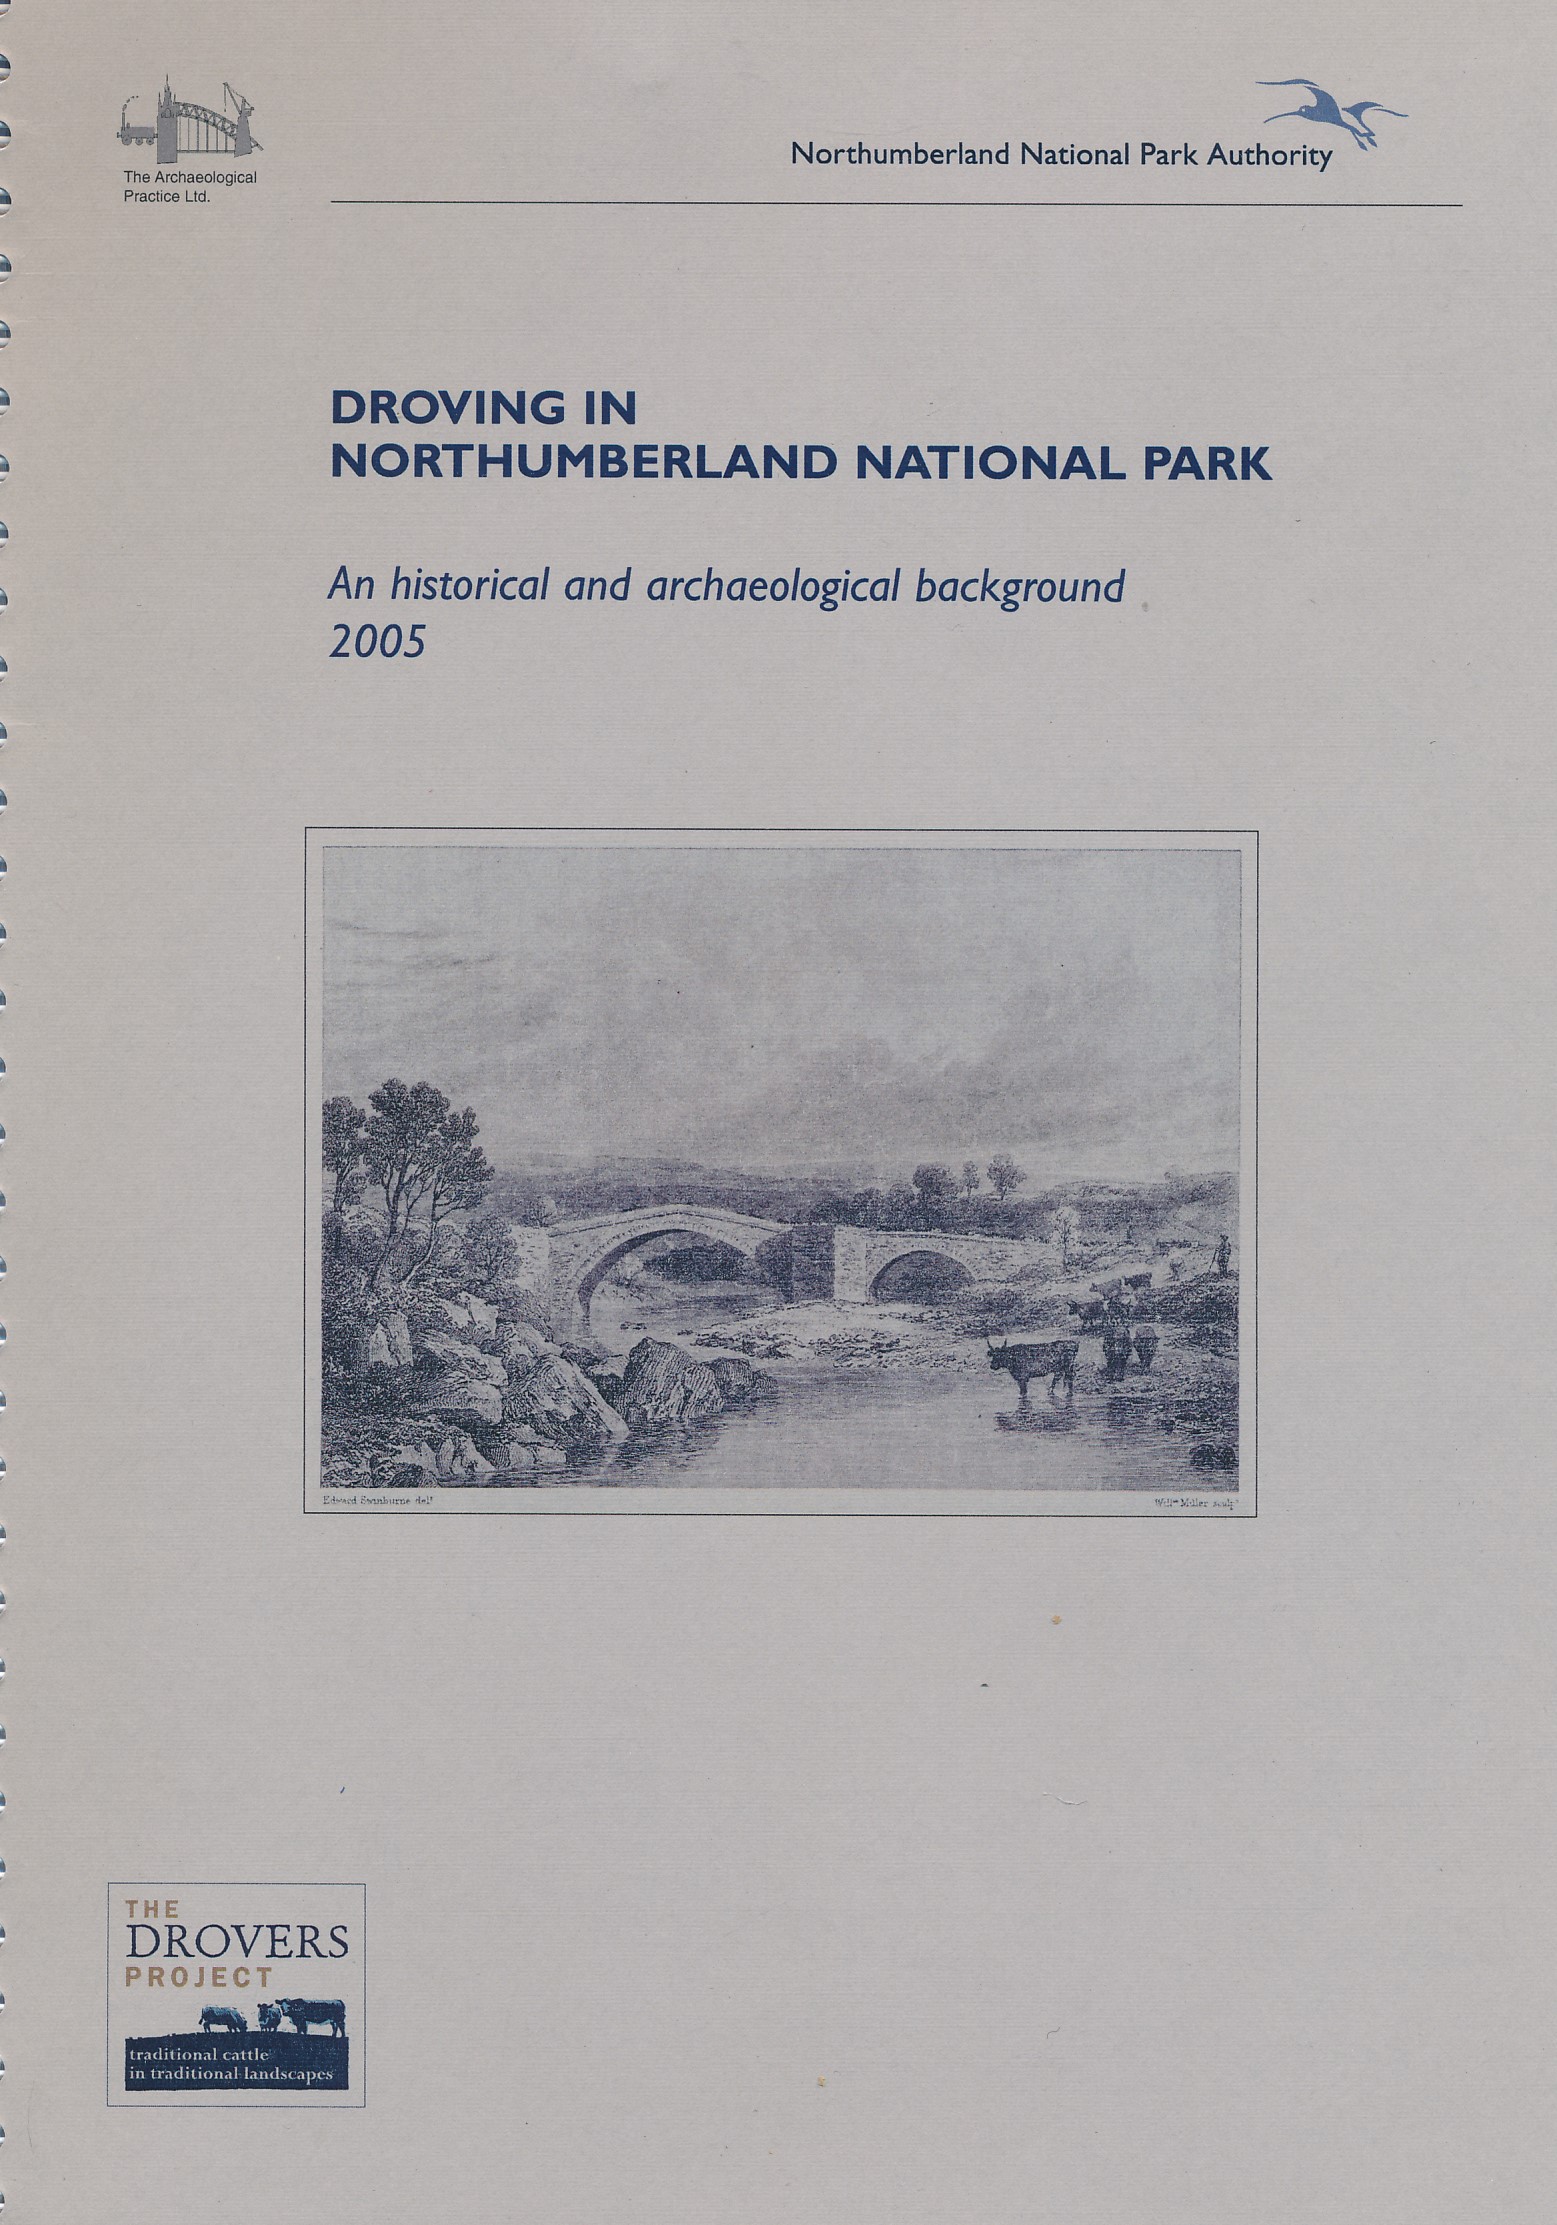 Droving in the Northumberland National Park. An Historical and Archaeological Background